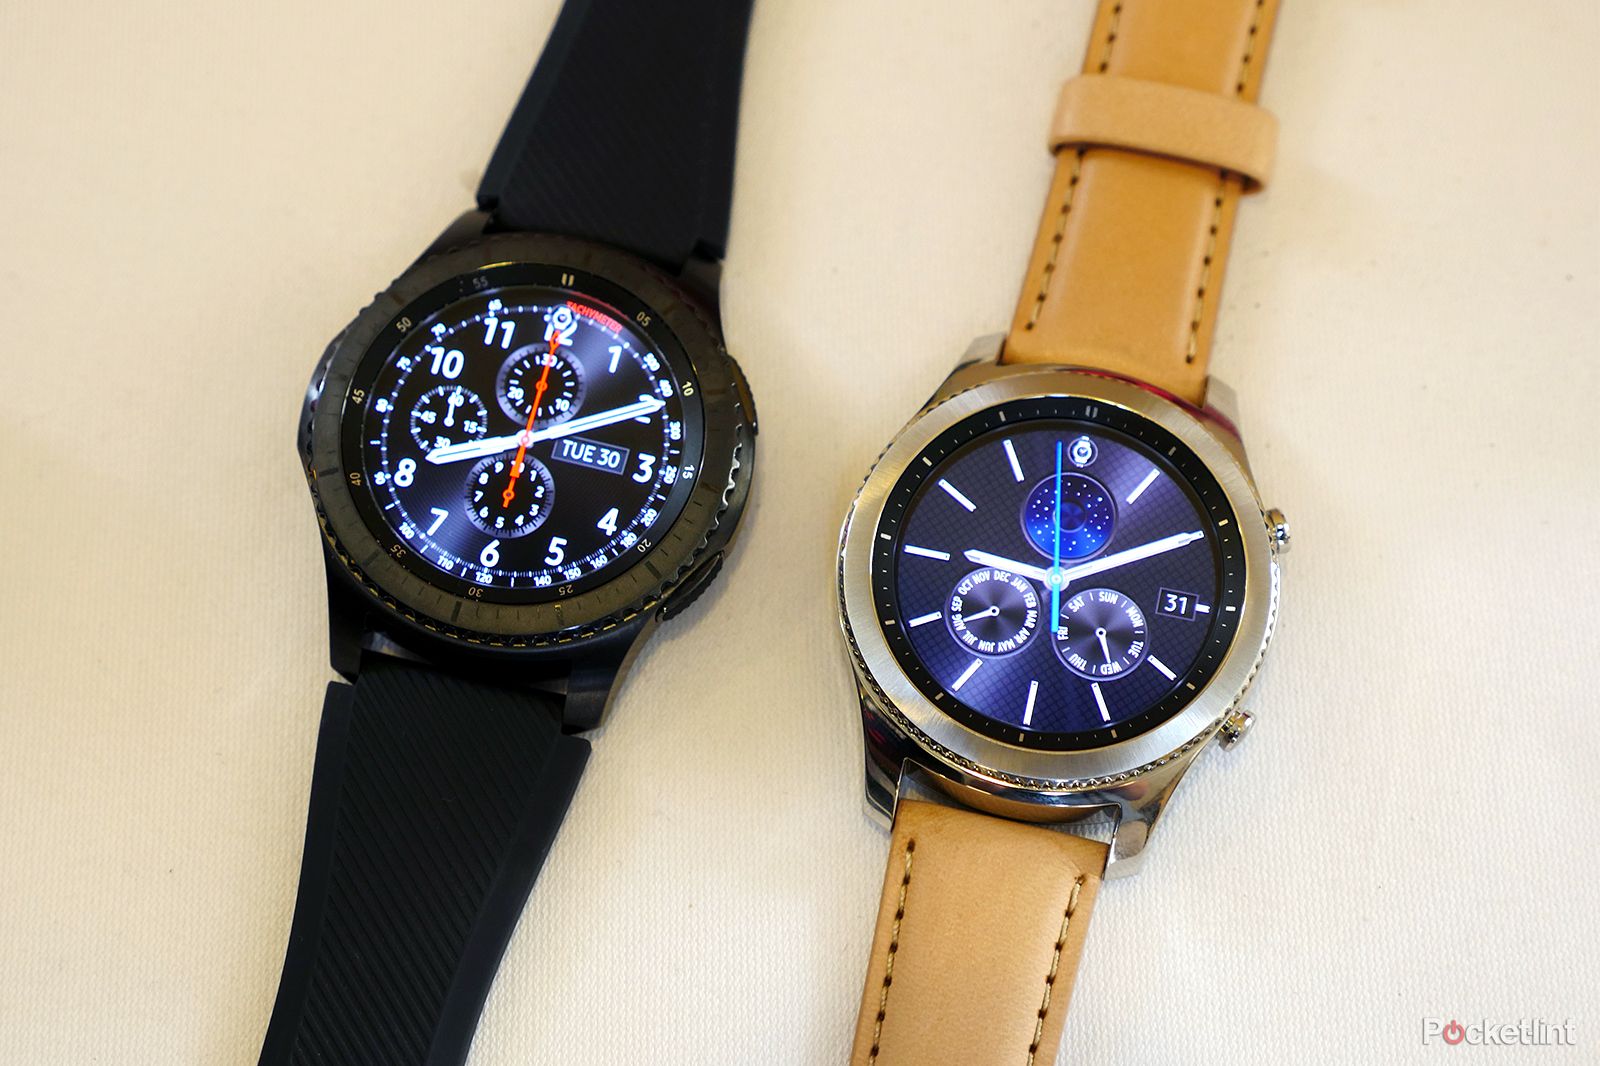 samsung gear s3 review image 2